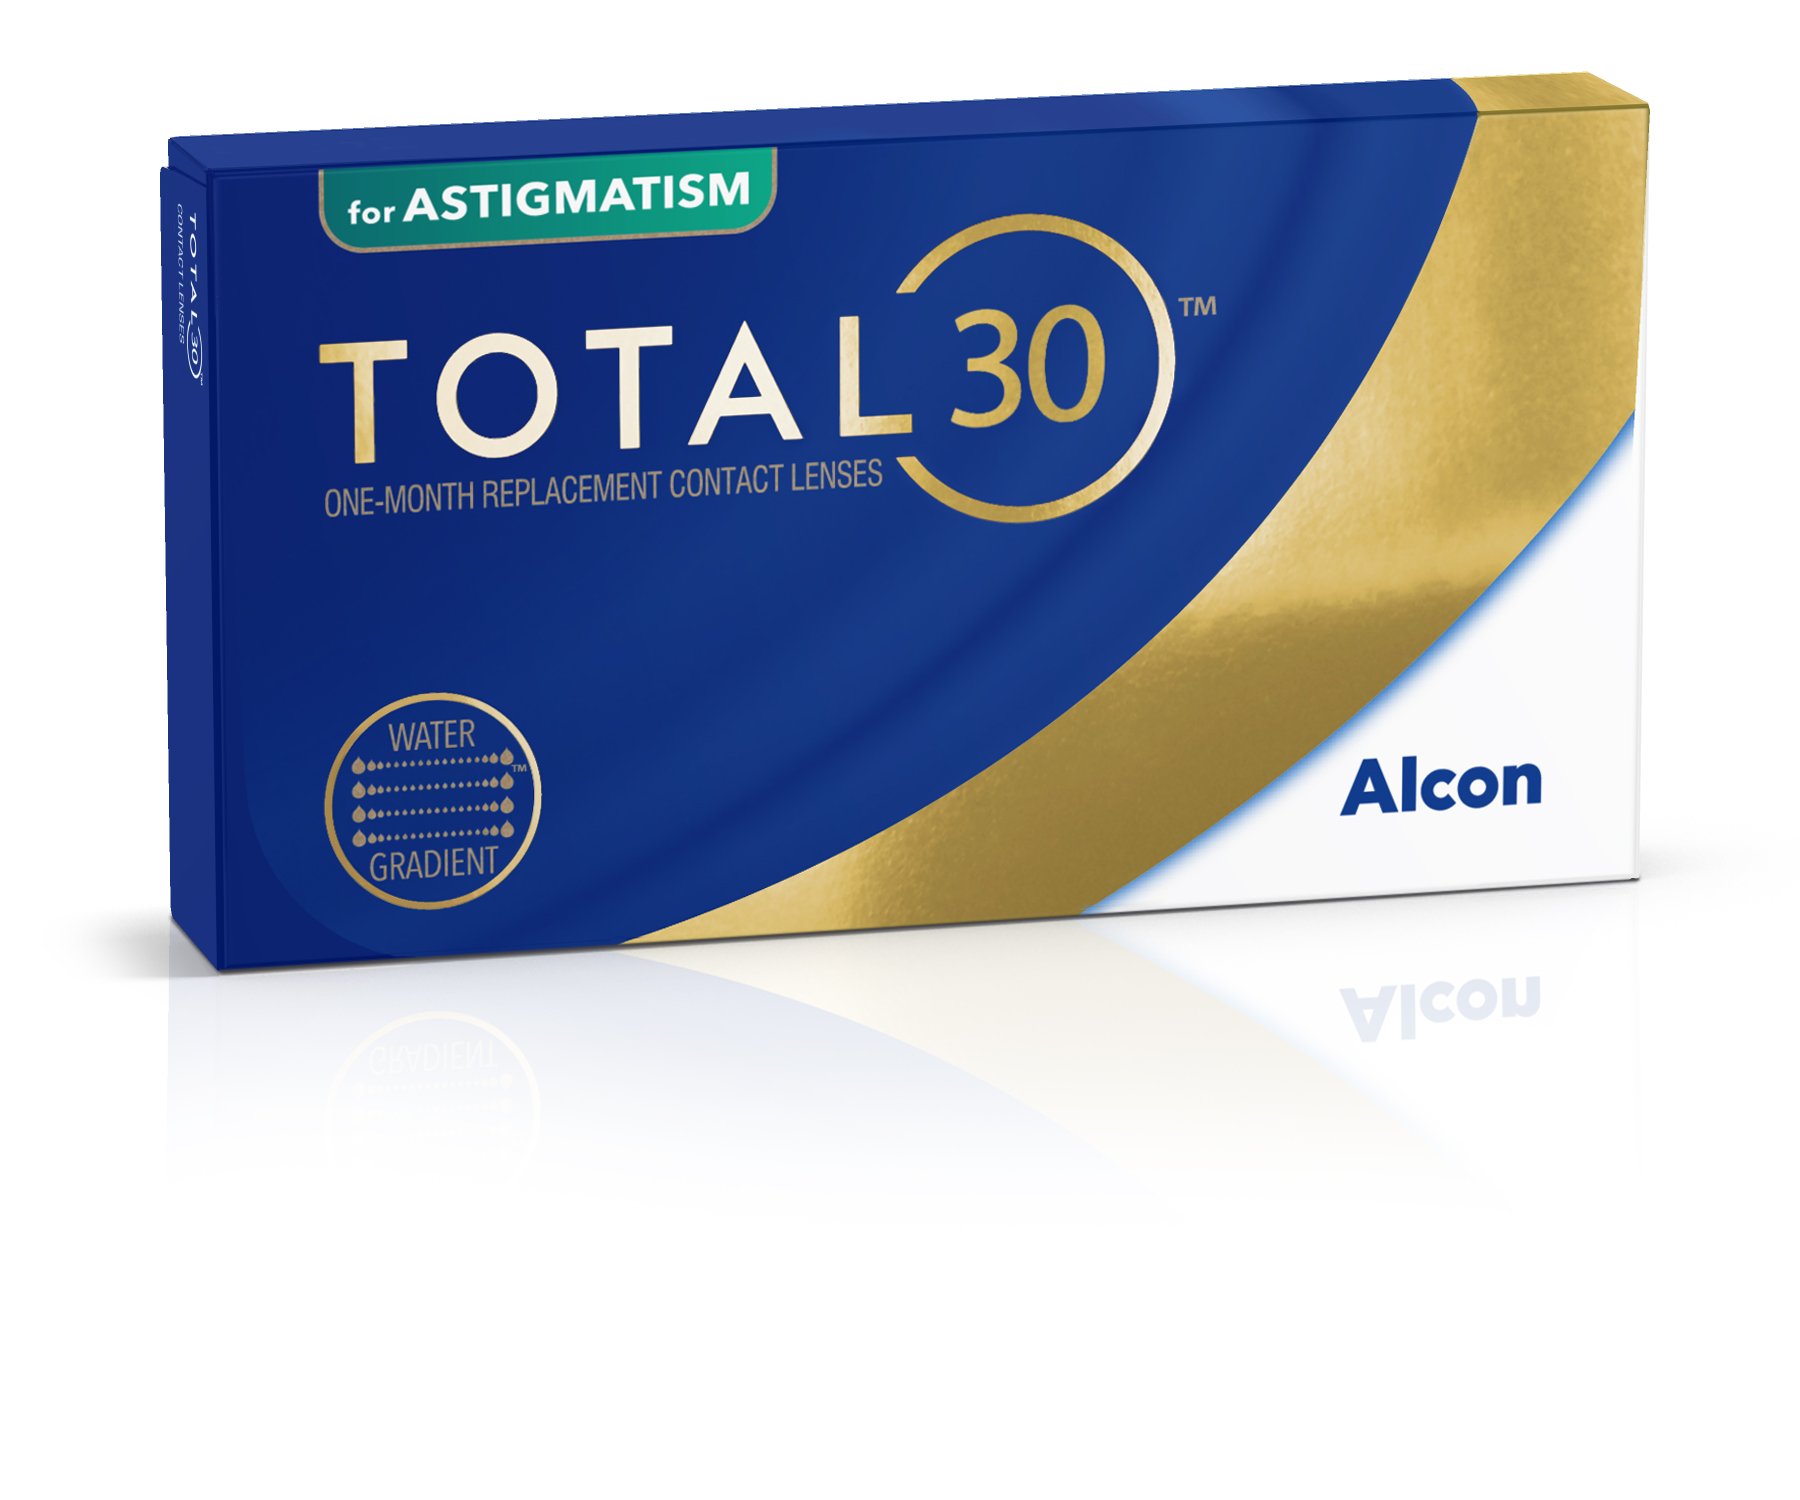 Total 30 for Astigmatism, Alcon (6 Stk.)